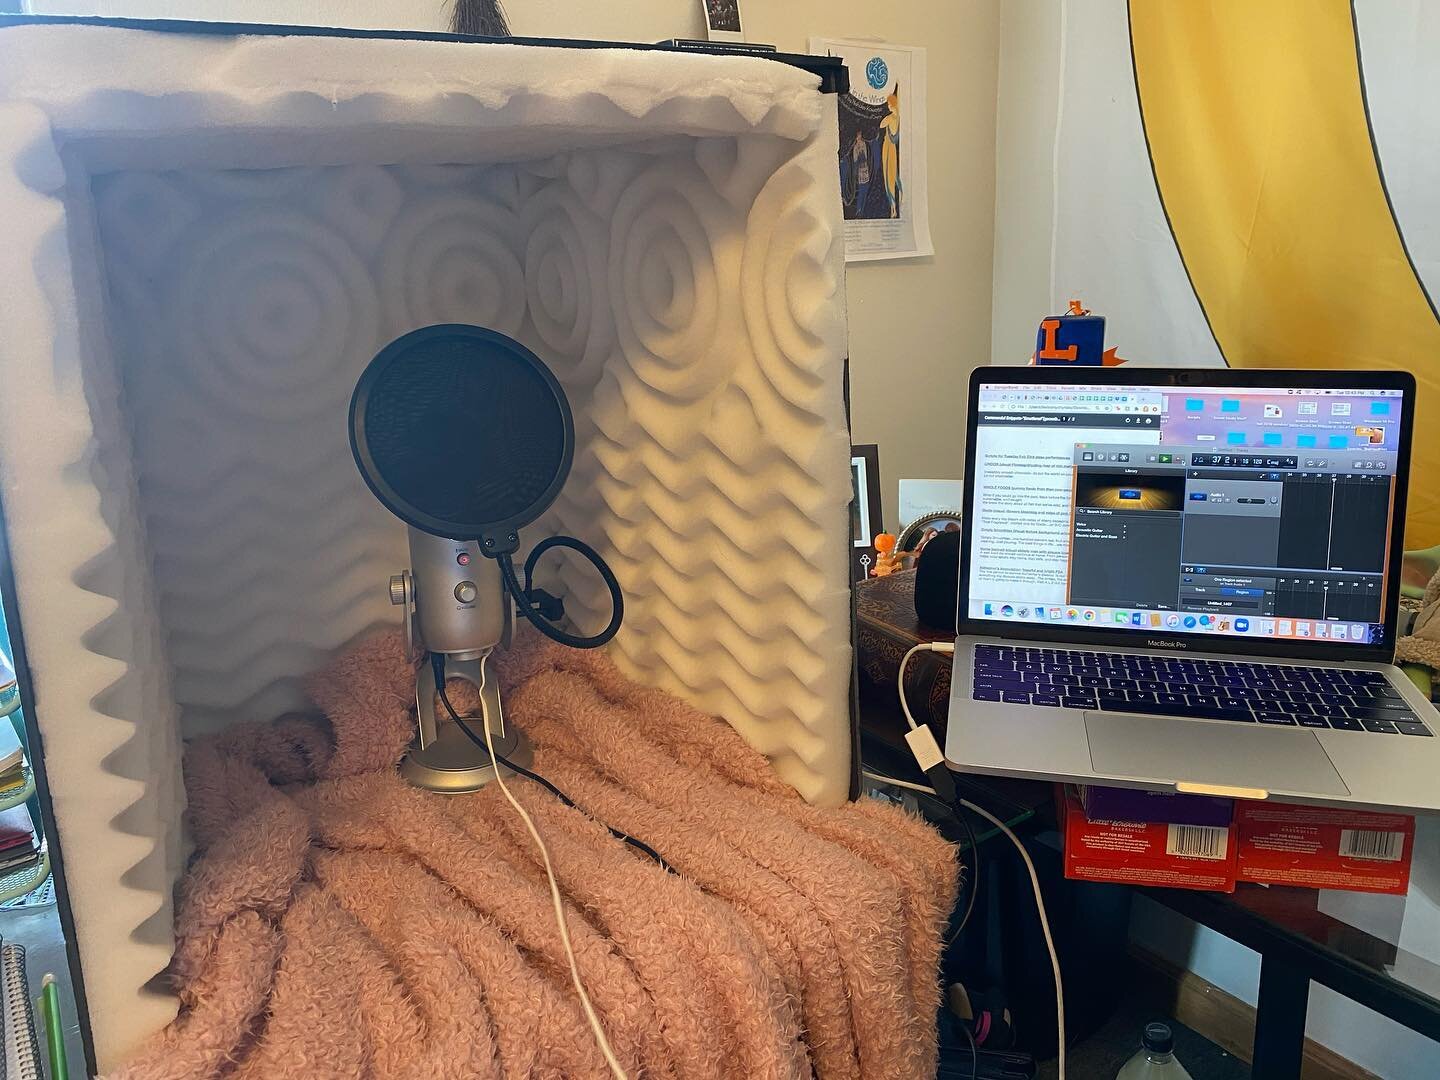 Every day I make more progress on my recording set up for my voiceover work! Today instead of the closet studio I set up, I tried this little sound box that my professor put together for us.